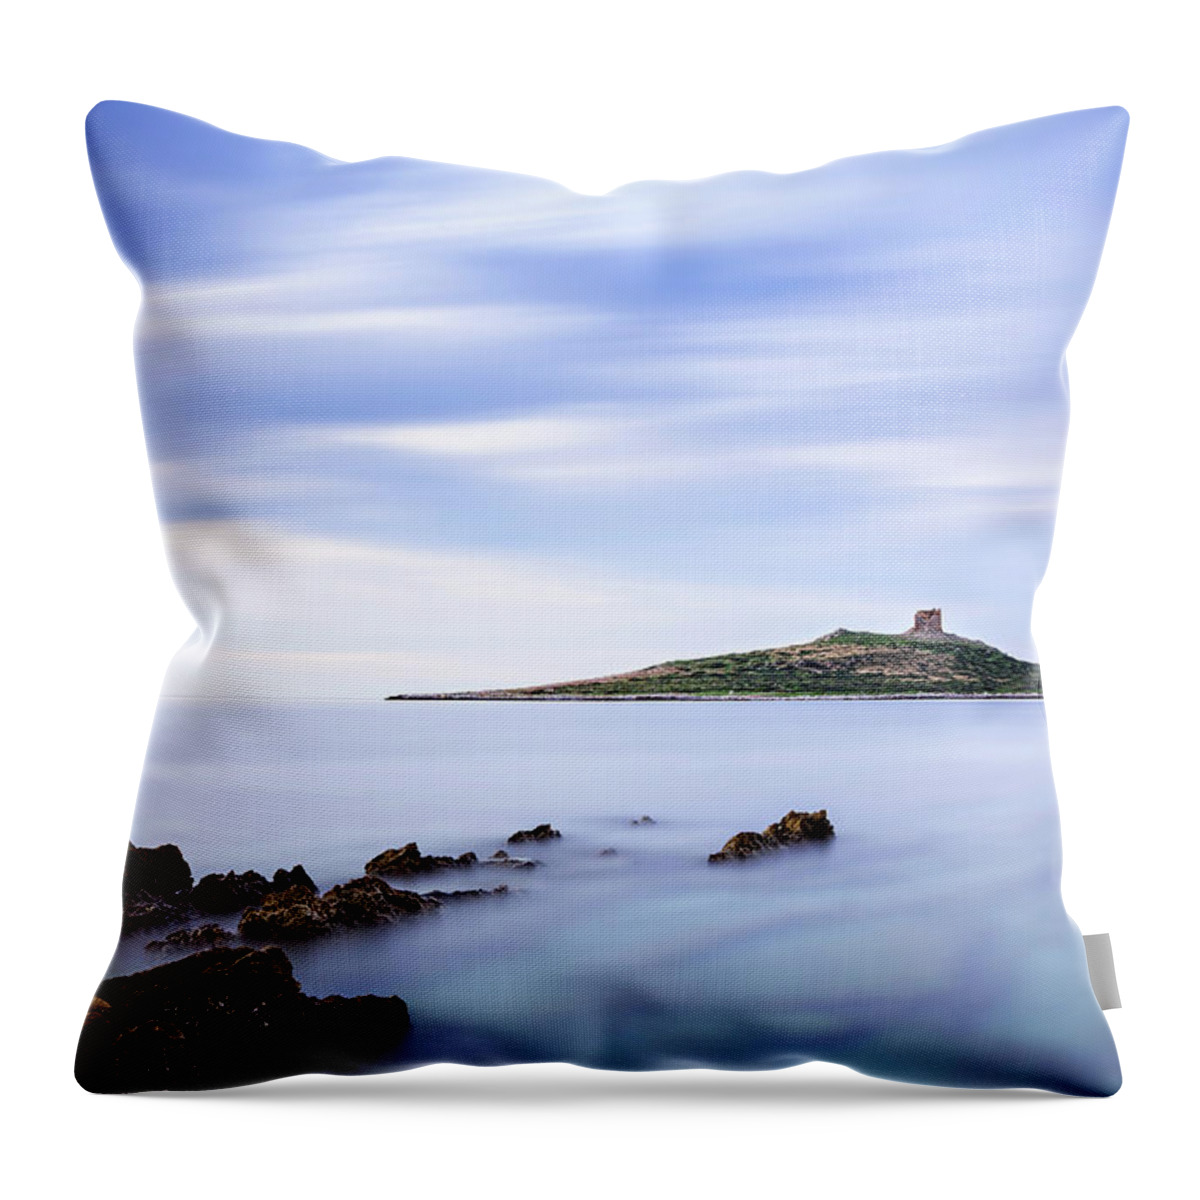 Isola Delle Femmine Throw Pillow featuring the photograph Isola Delle Femmine, Palermo, Sicily by Ian Good